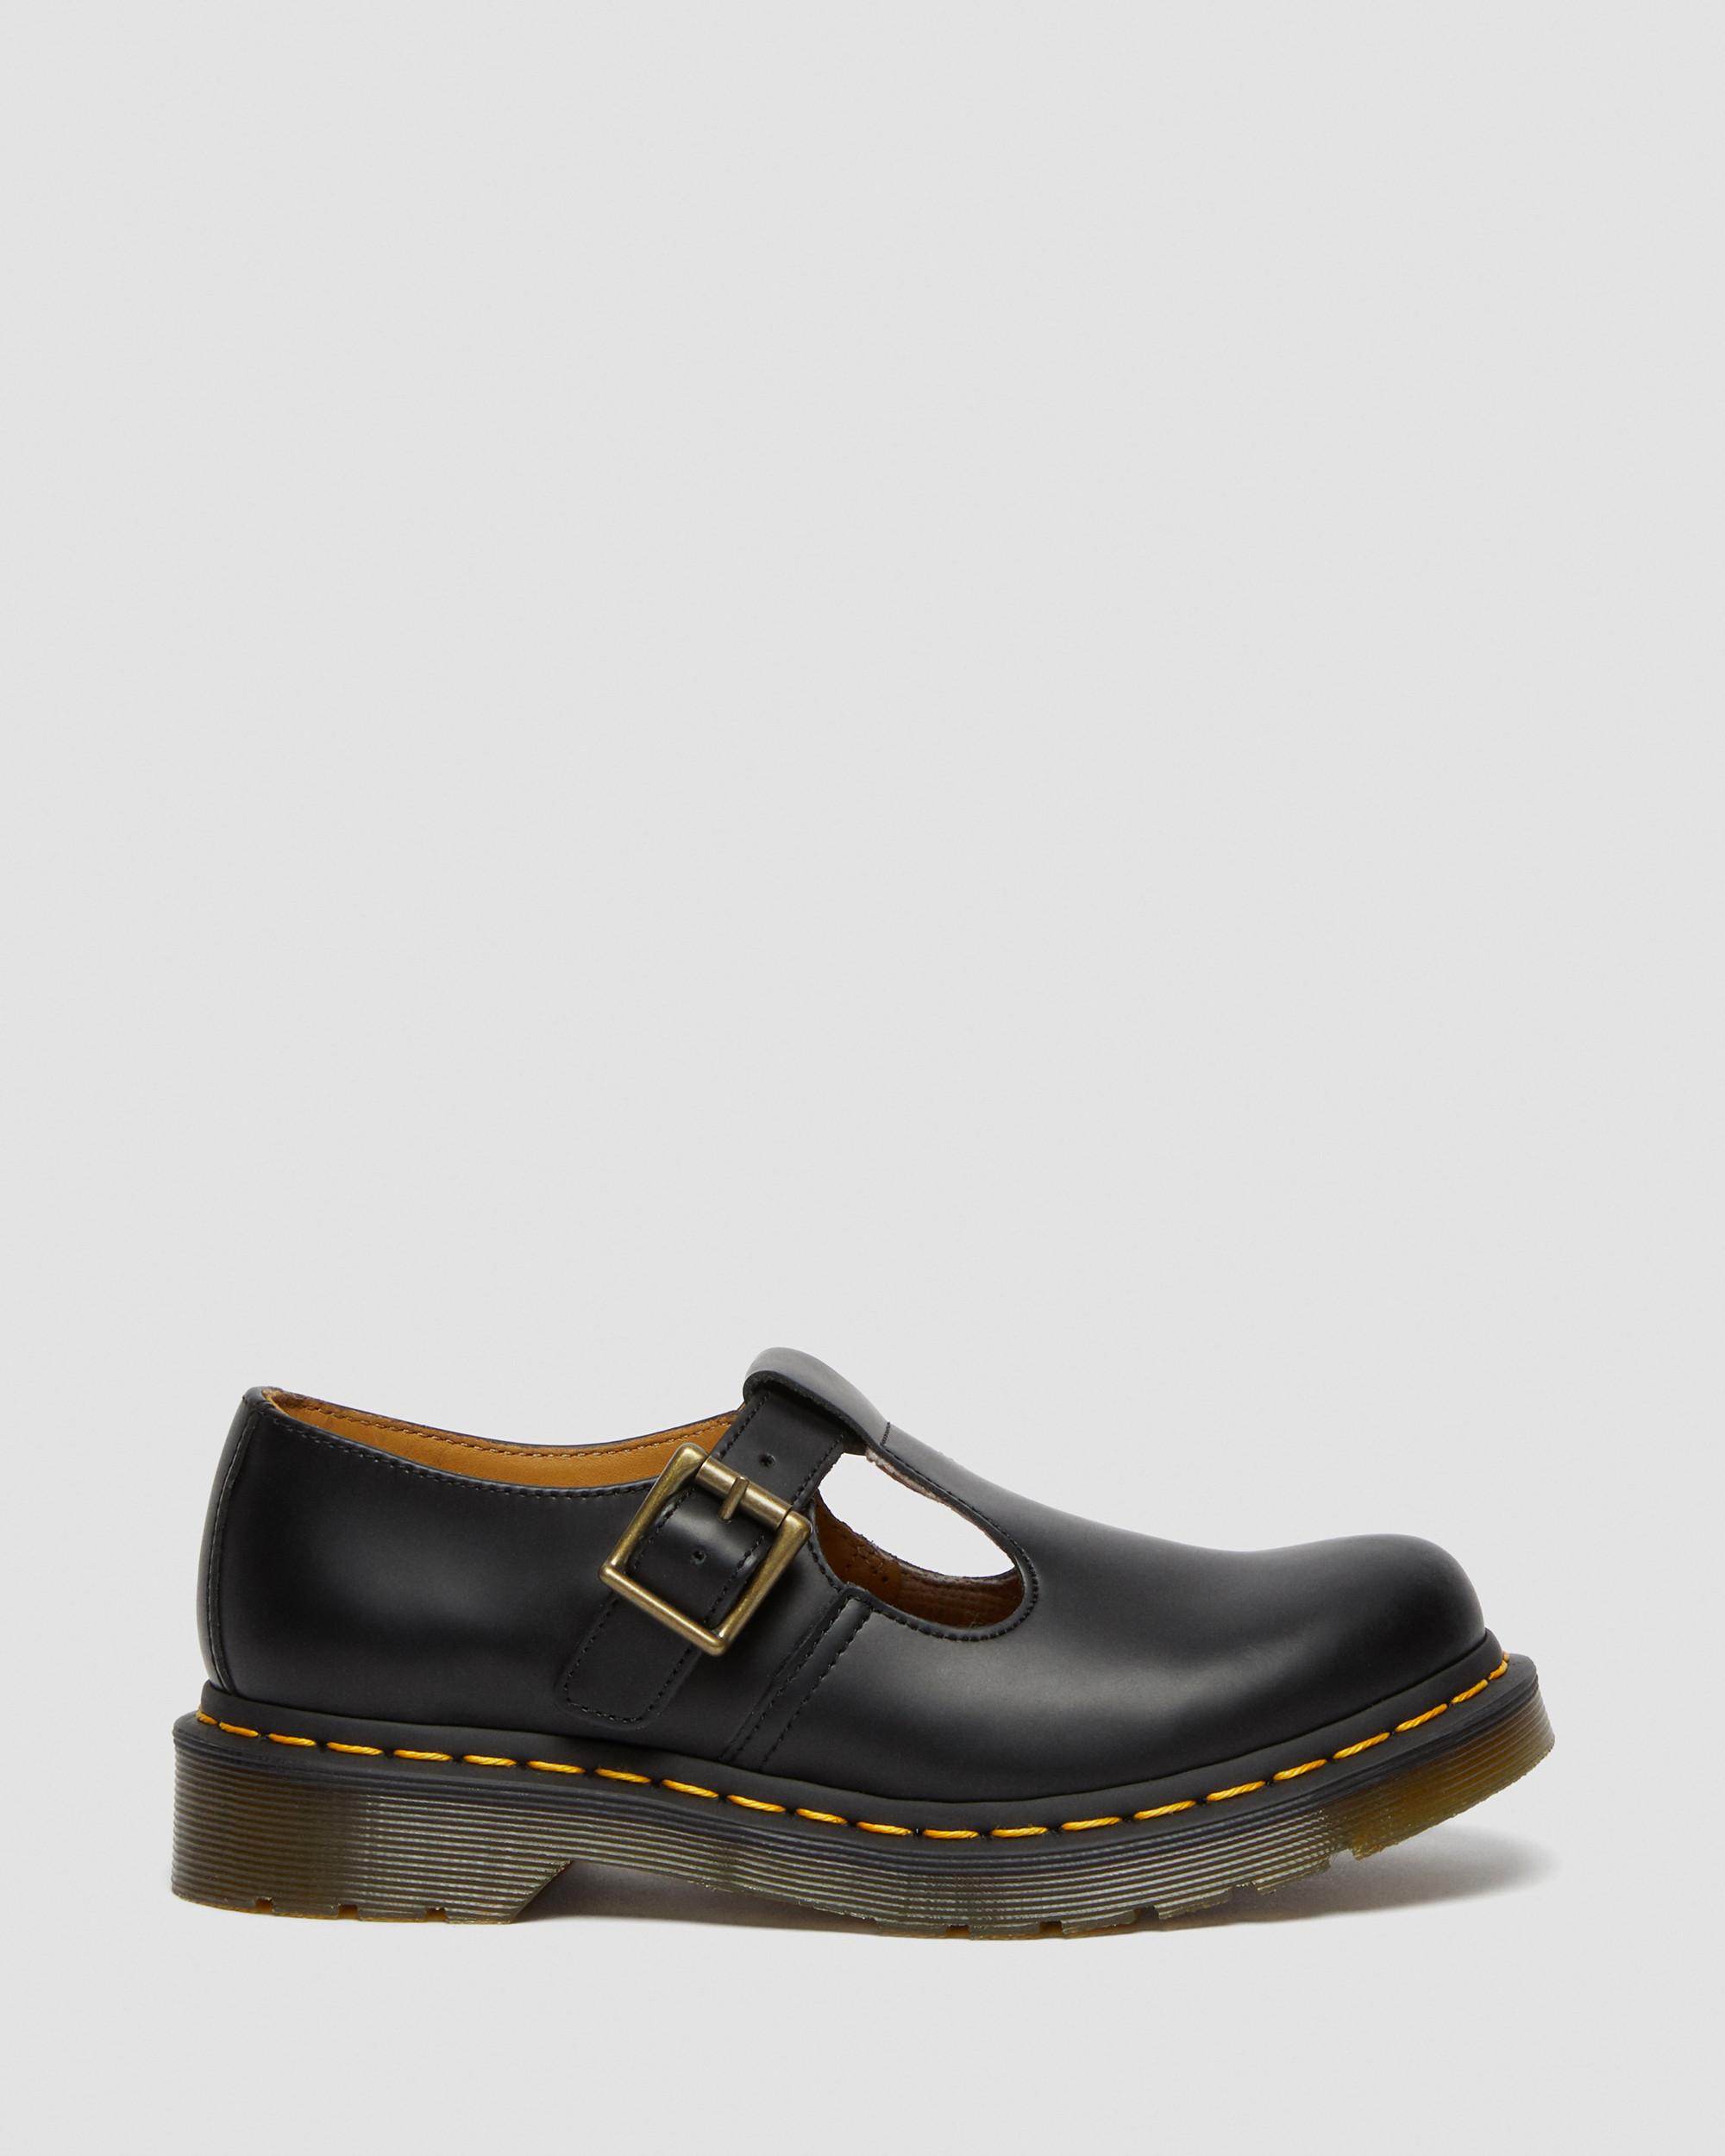 DR MARTENS Polley Smooth Leather Mary Janes